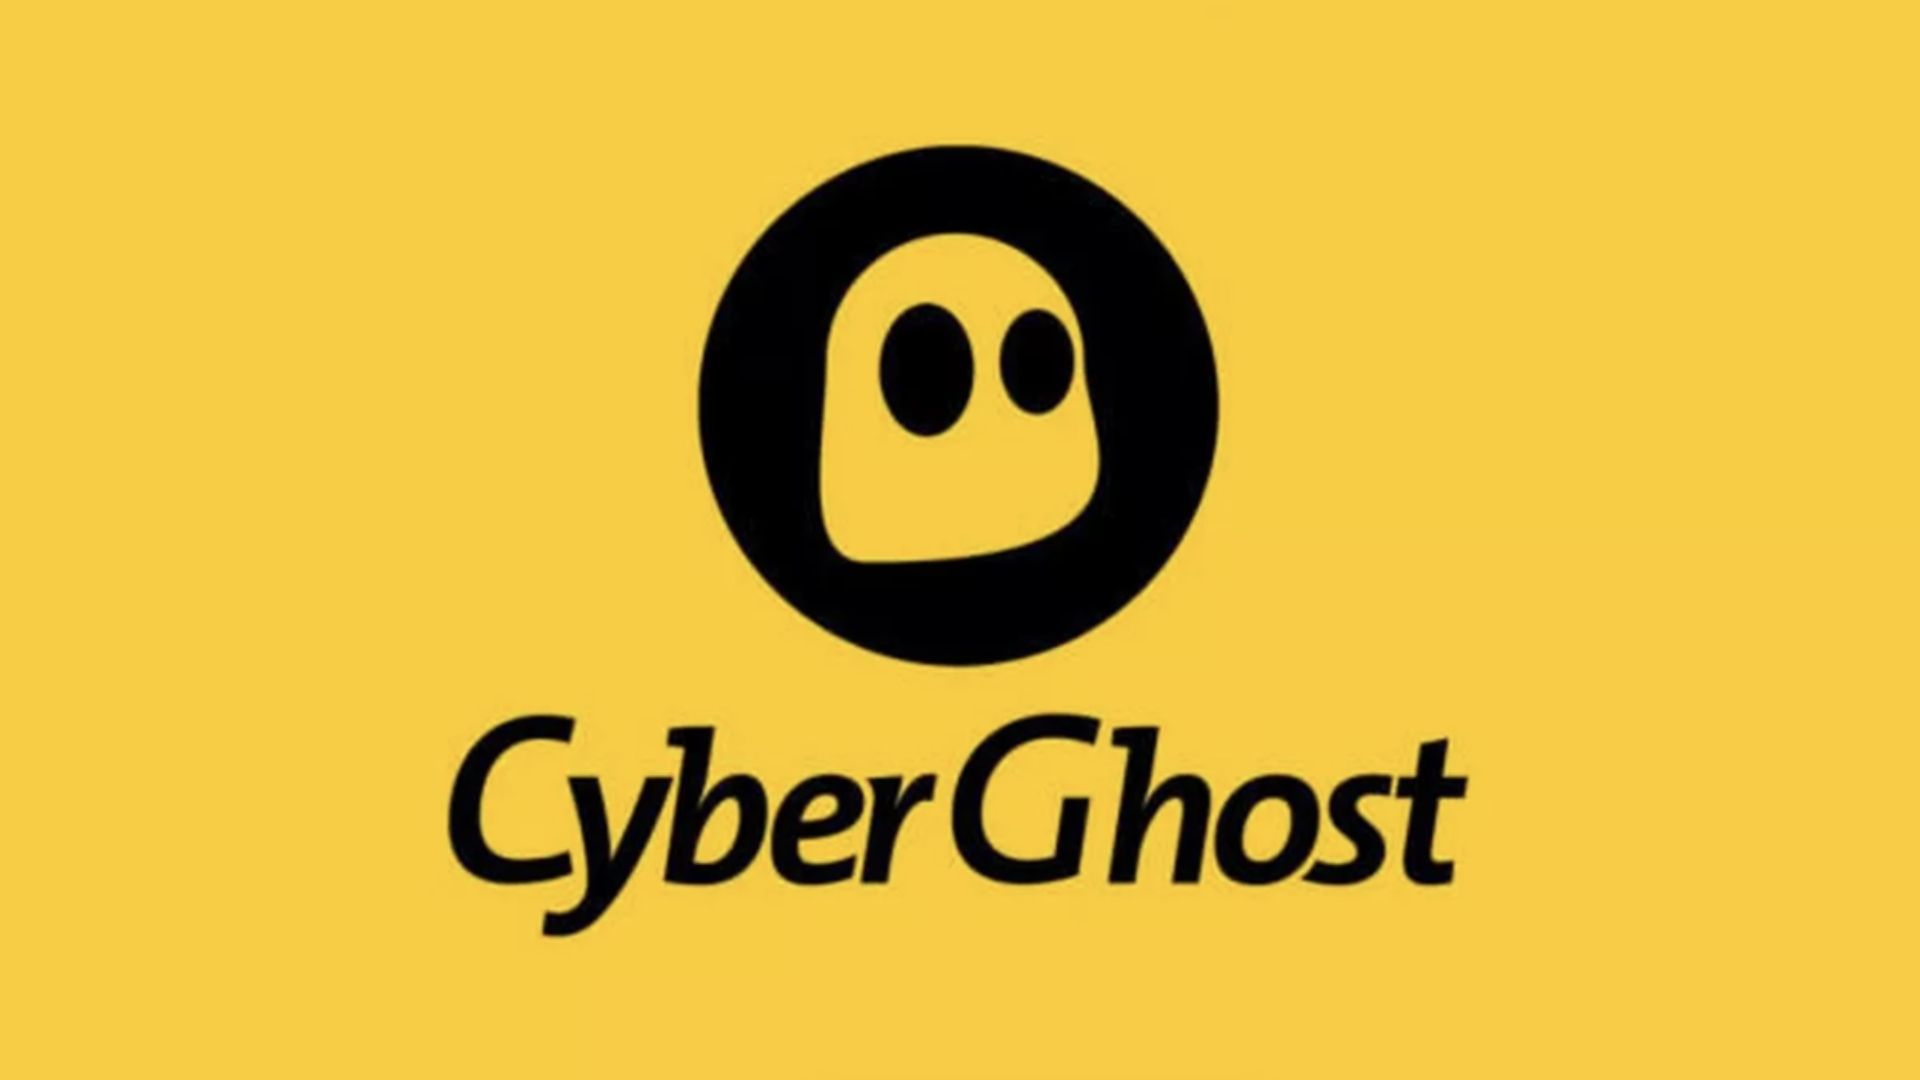 Best Windows 10 VPN - CyberGhost. Image shows the company's logo on a yellow background.